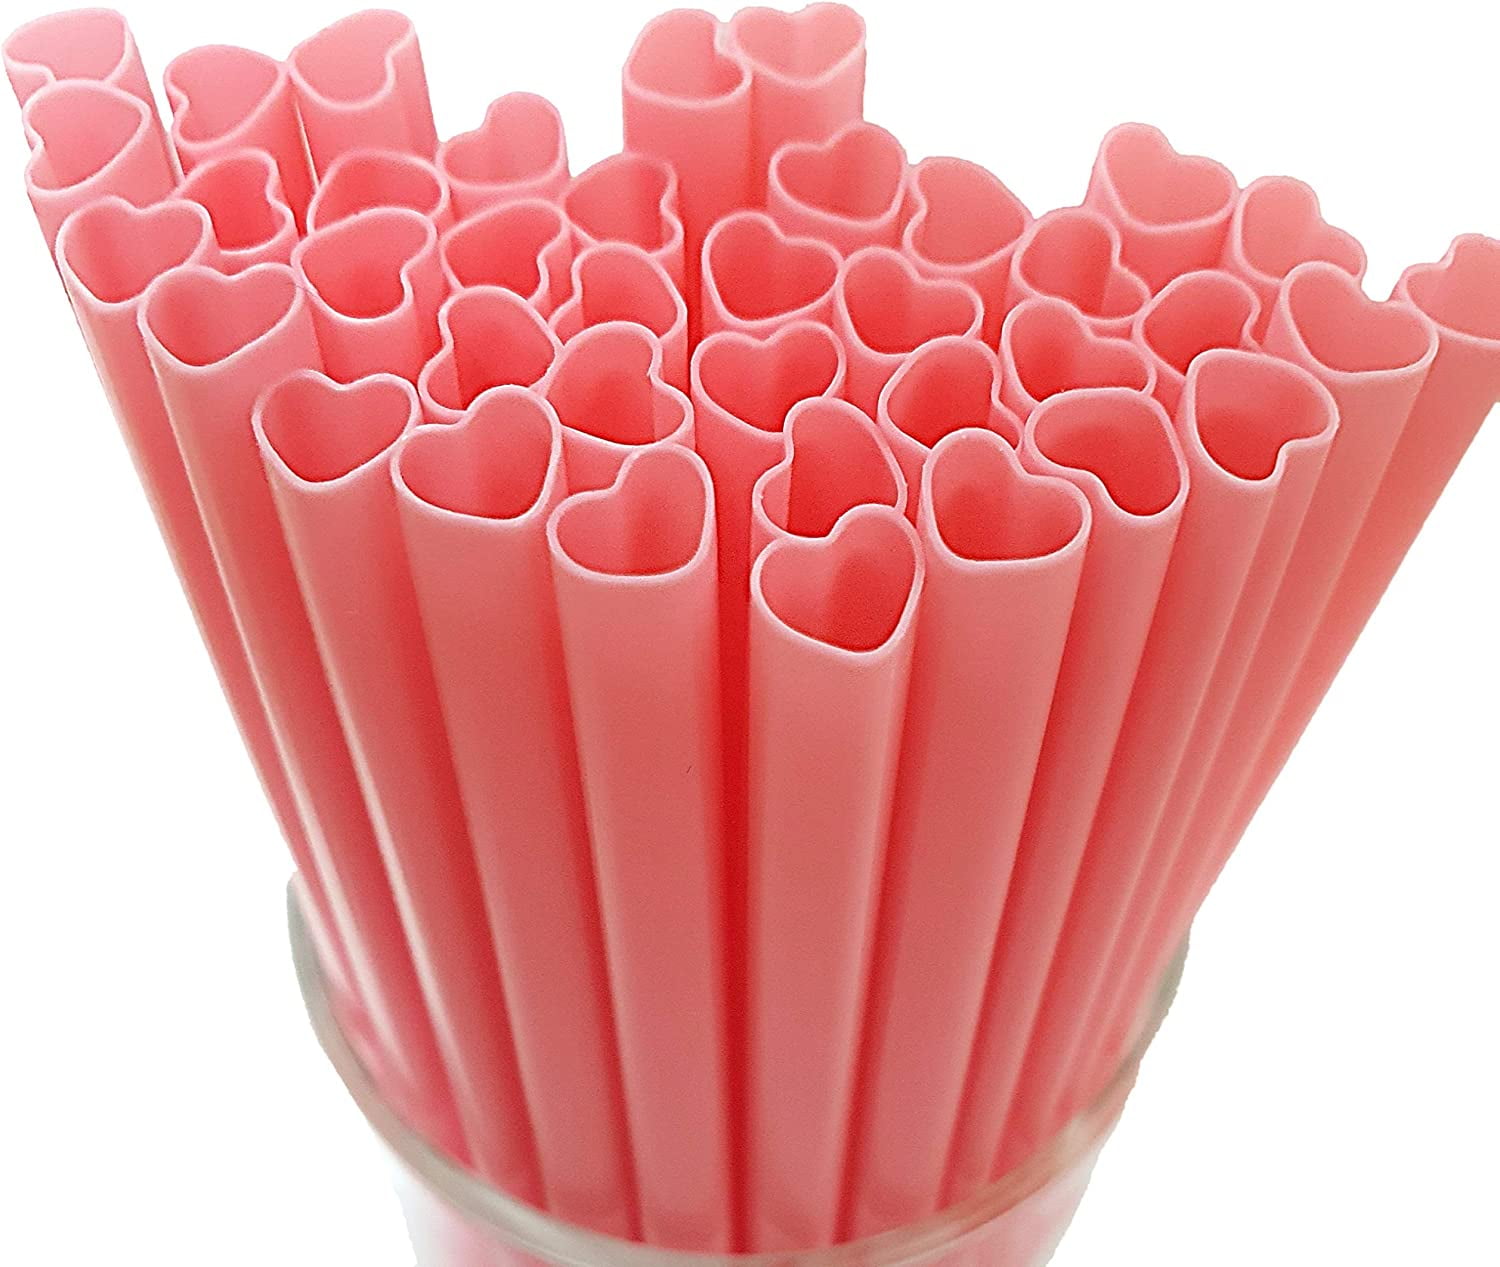 100 pcs 7.5 Clear individually wrapped Bubble Boba tea fat Straws  Smoothies Jumbo Thick holiday event party Drinking PP straws $6…